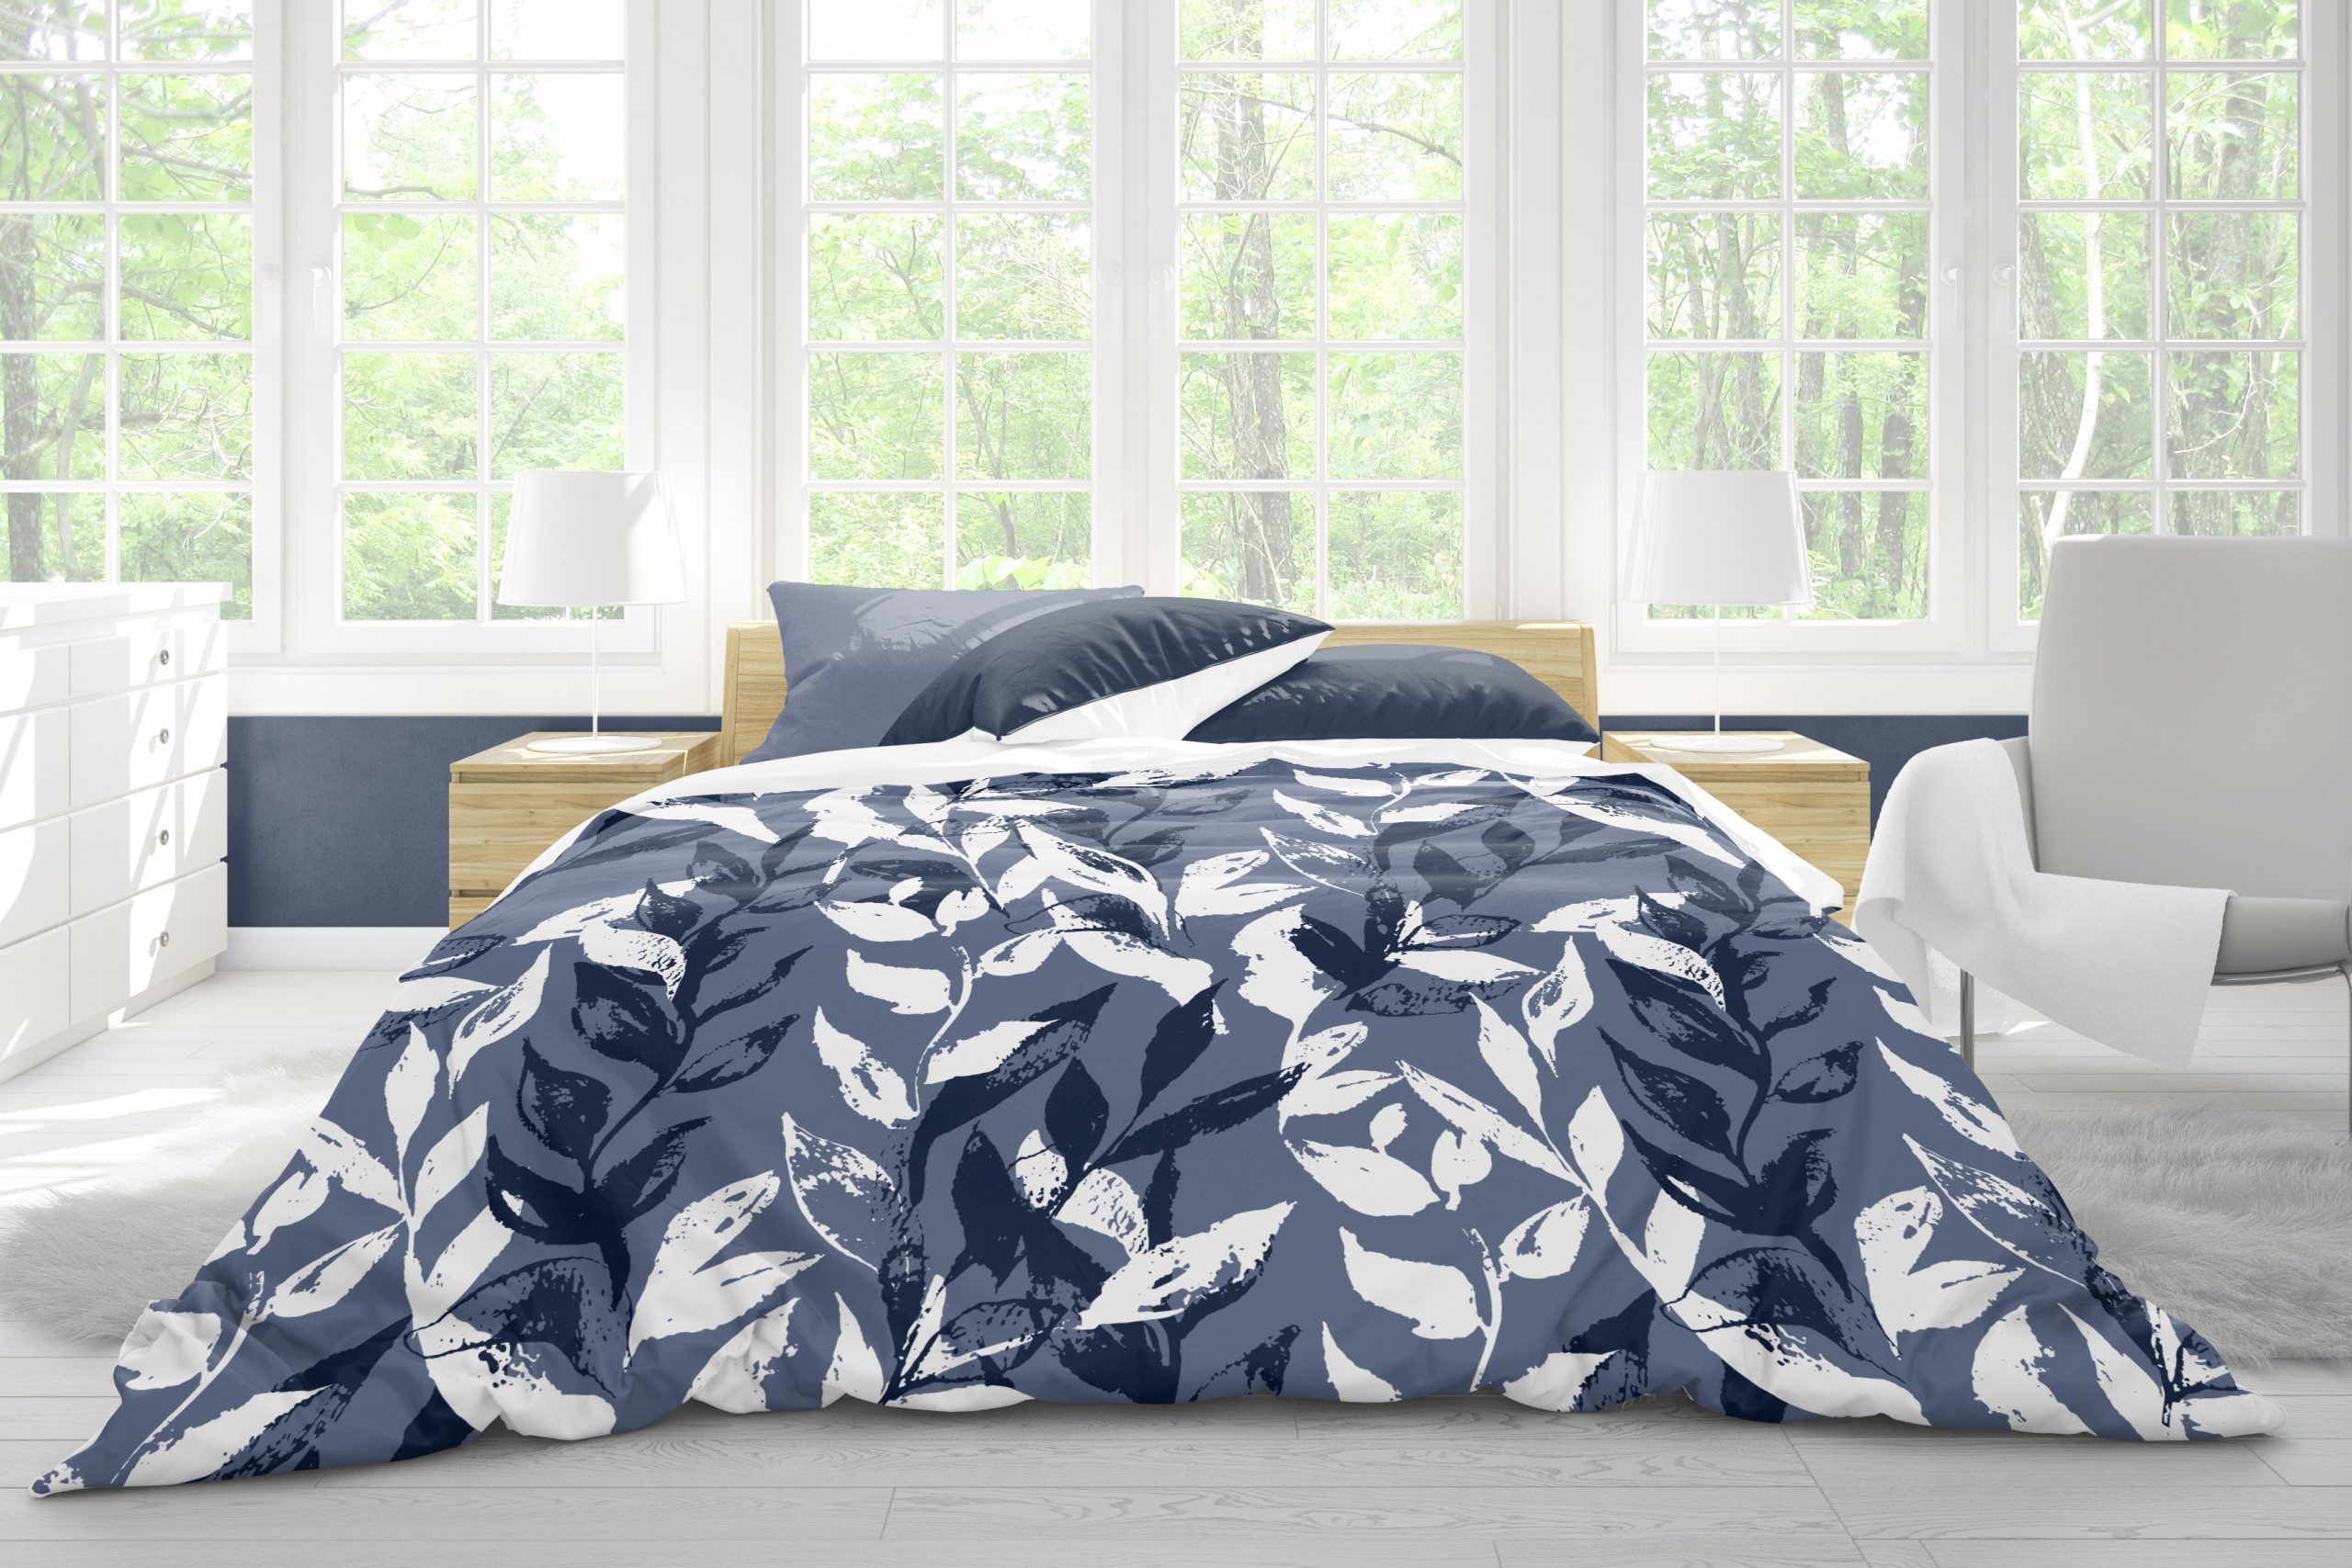 Read more about the article The Art of Bedding: Choosing the Perfect Duvet Cover